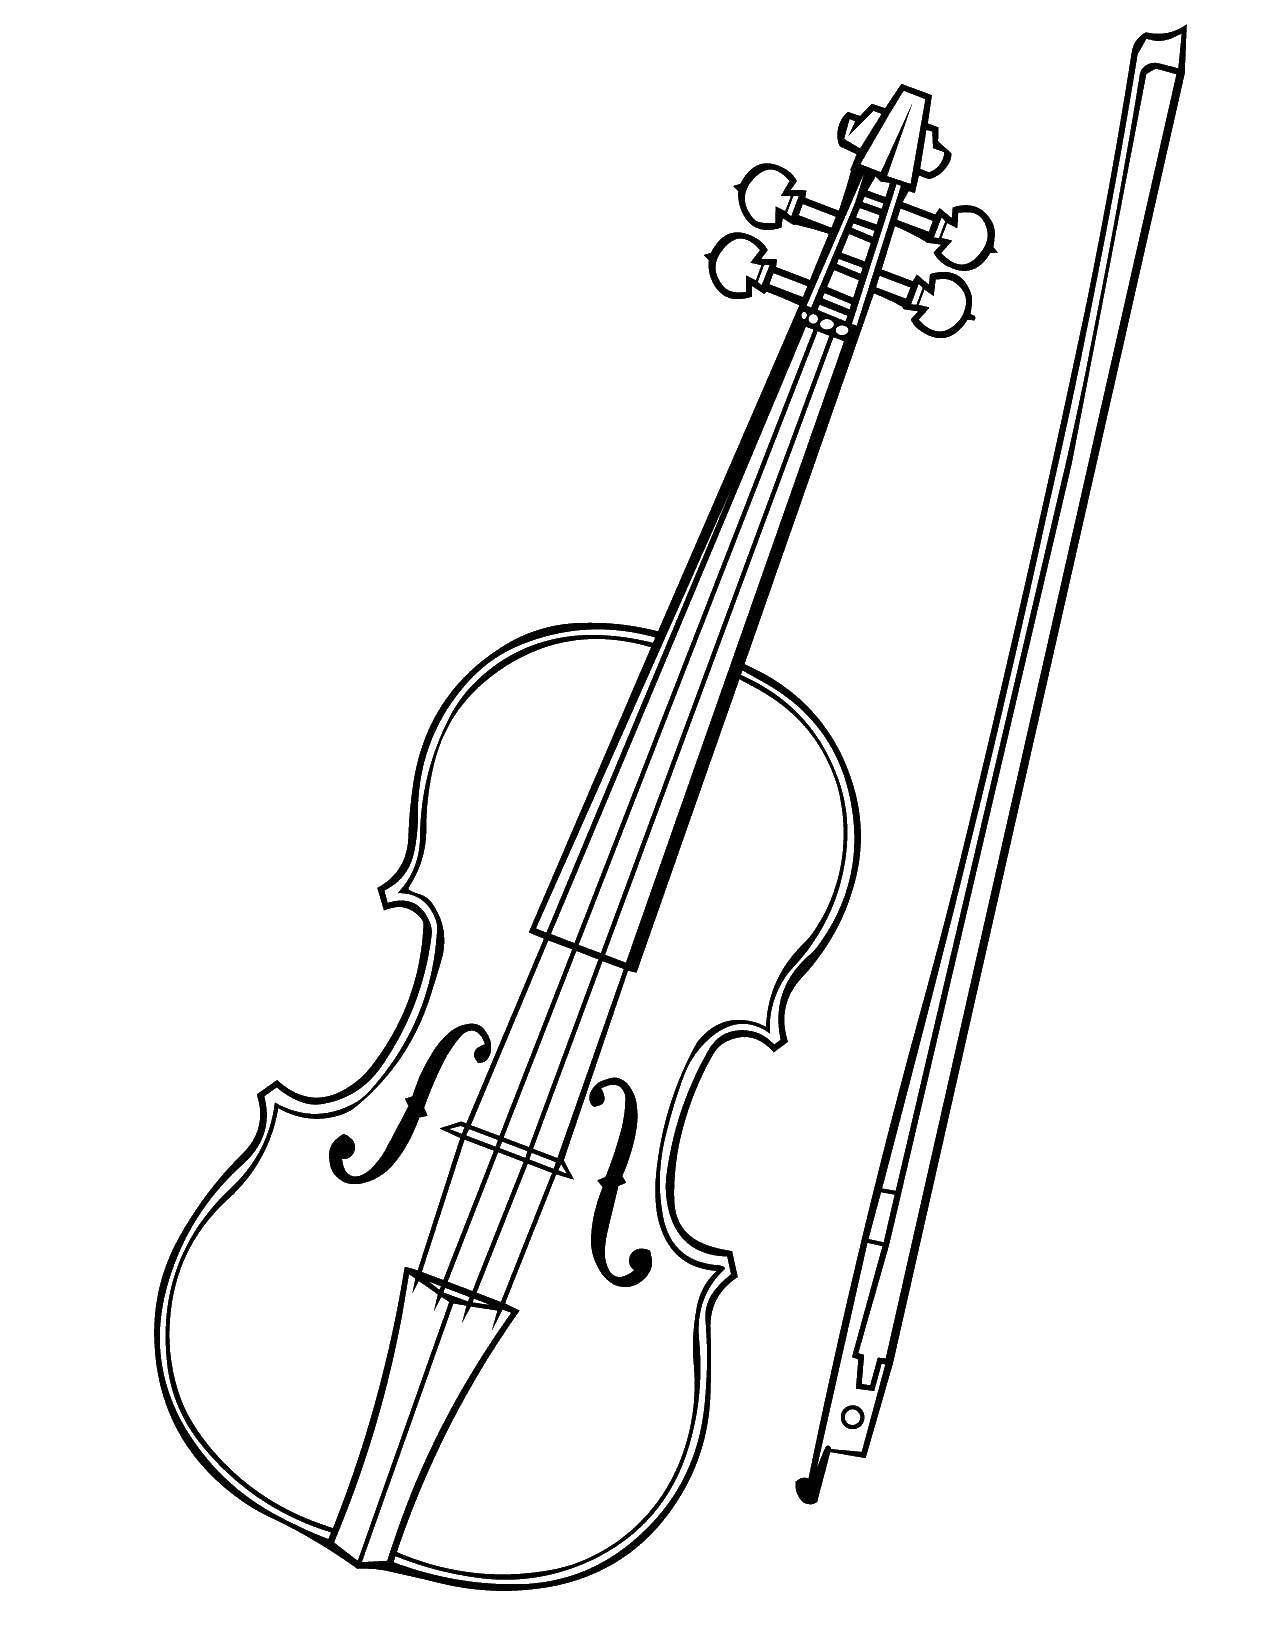 Coloring Cello. Category Music. Tags:  Music, instrument, musician, note.